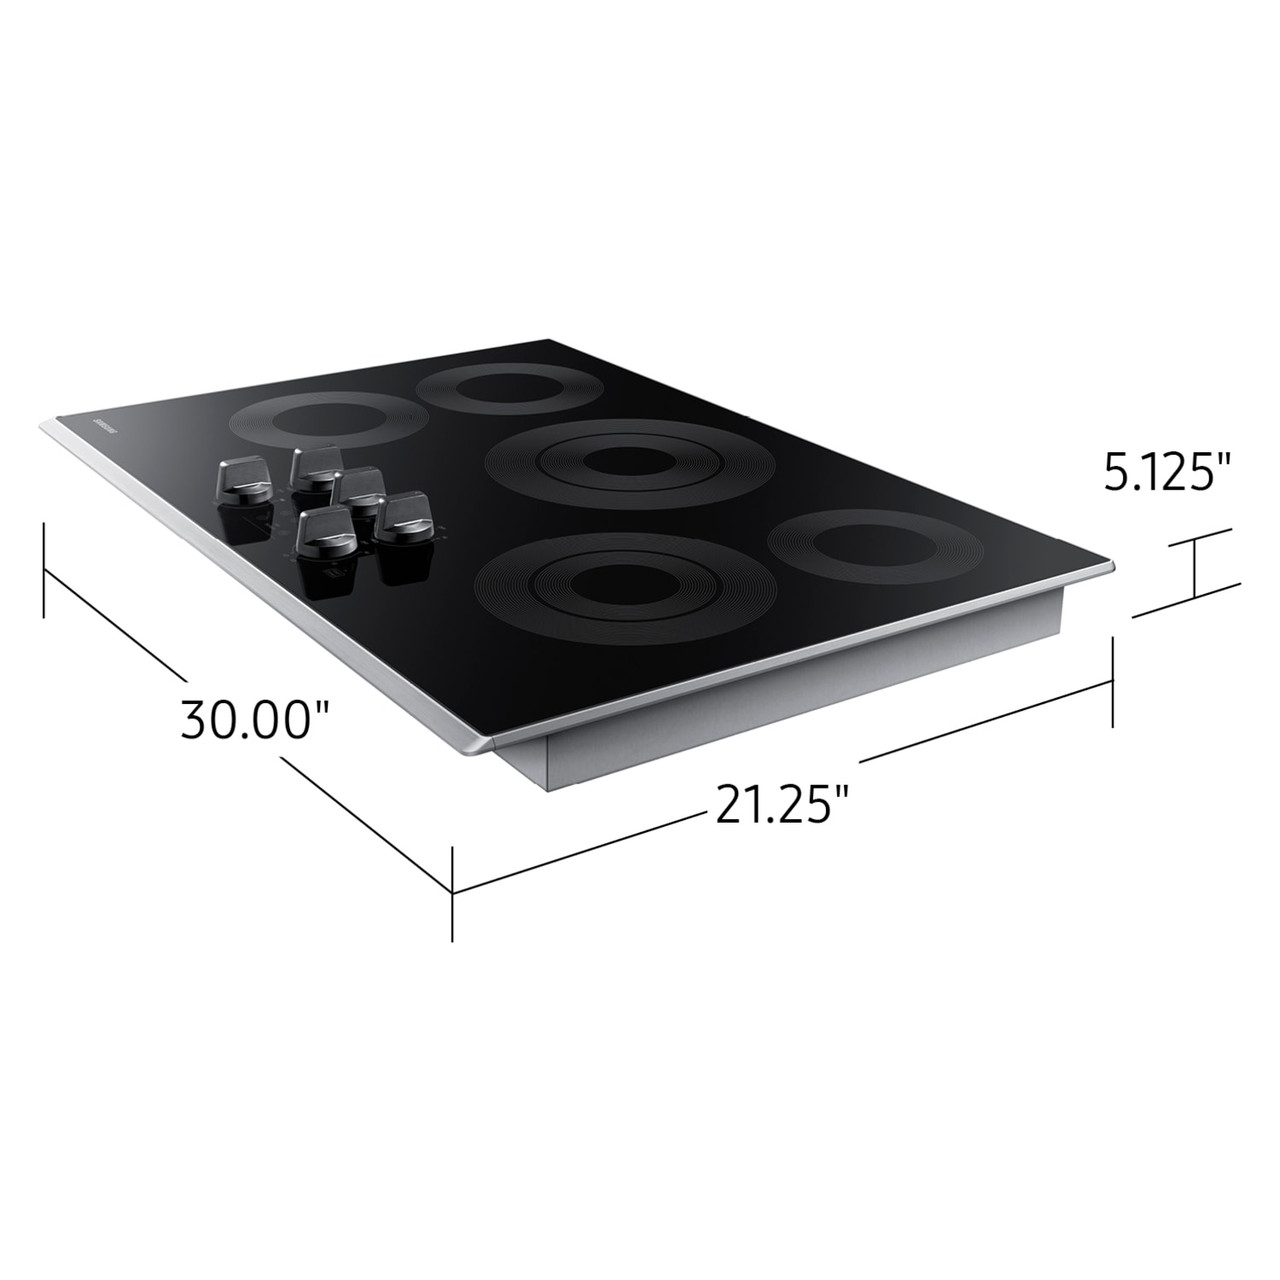 Samsung 30”, 5 Elements Cooktop - Stainless Steel - NZ30K6330RS